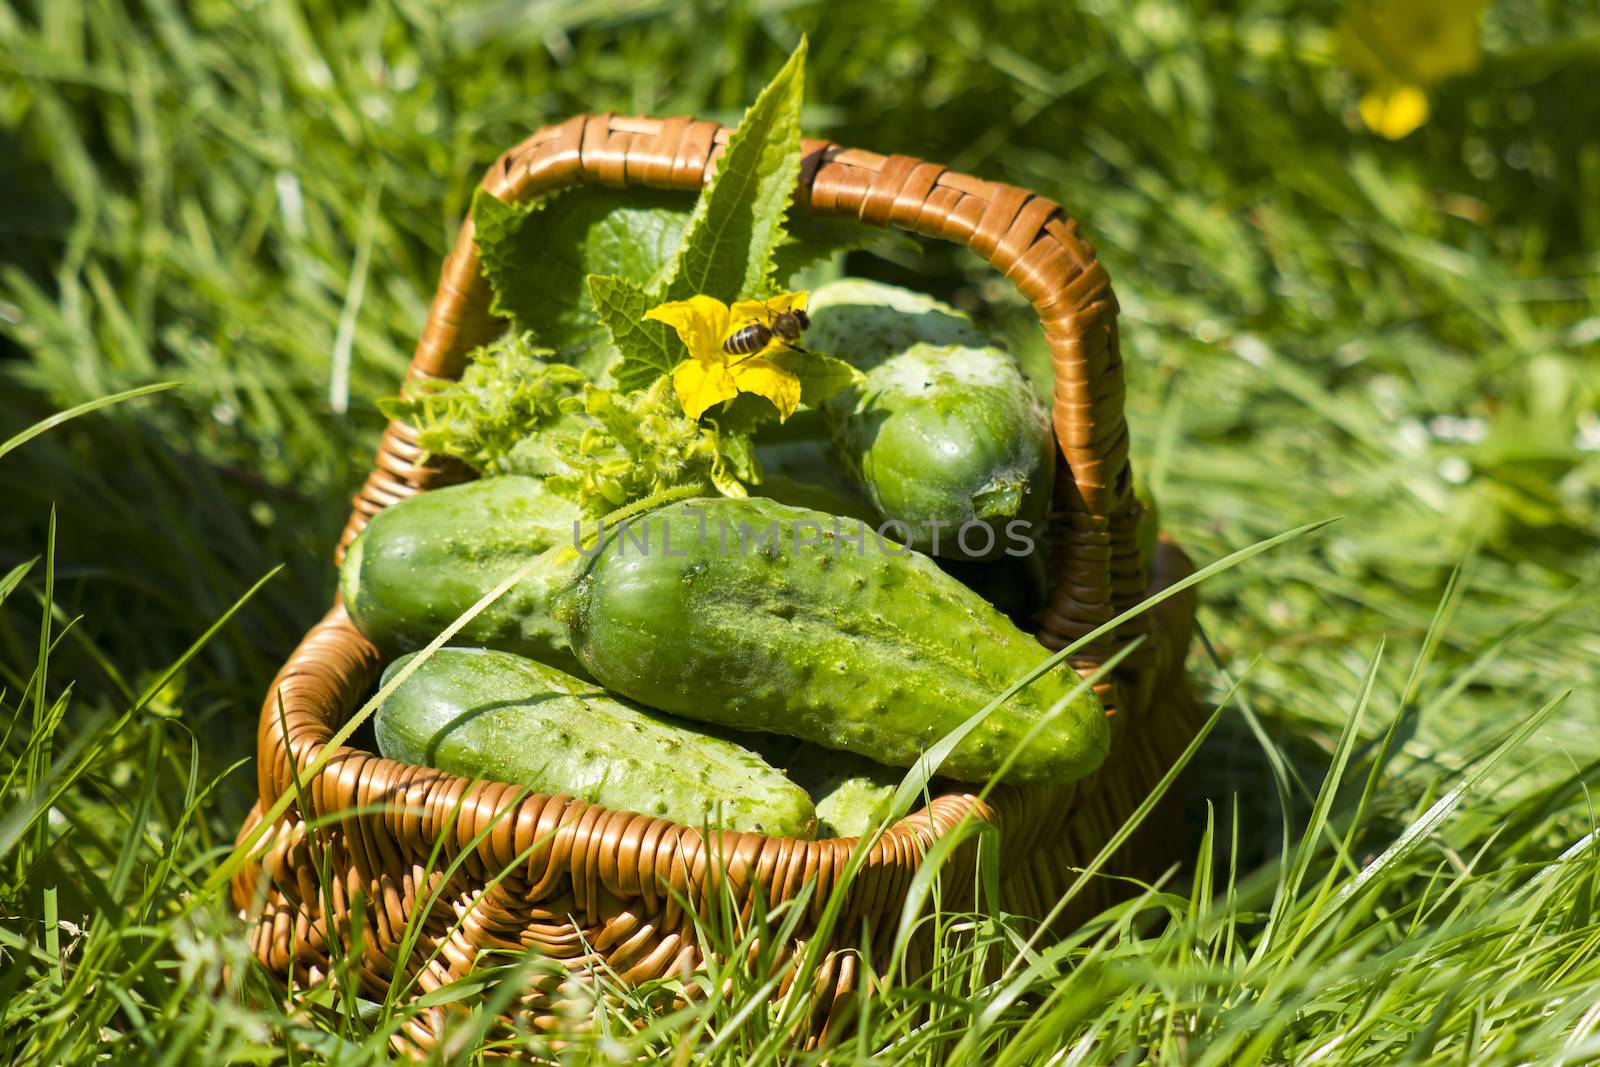 Harvest cucumbers in a basket  by miradrozdowski